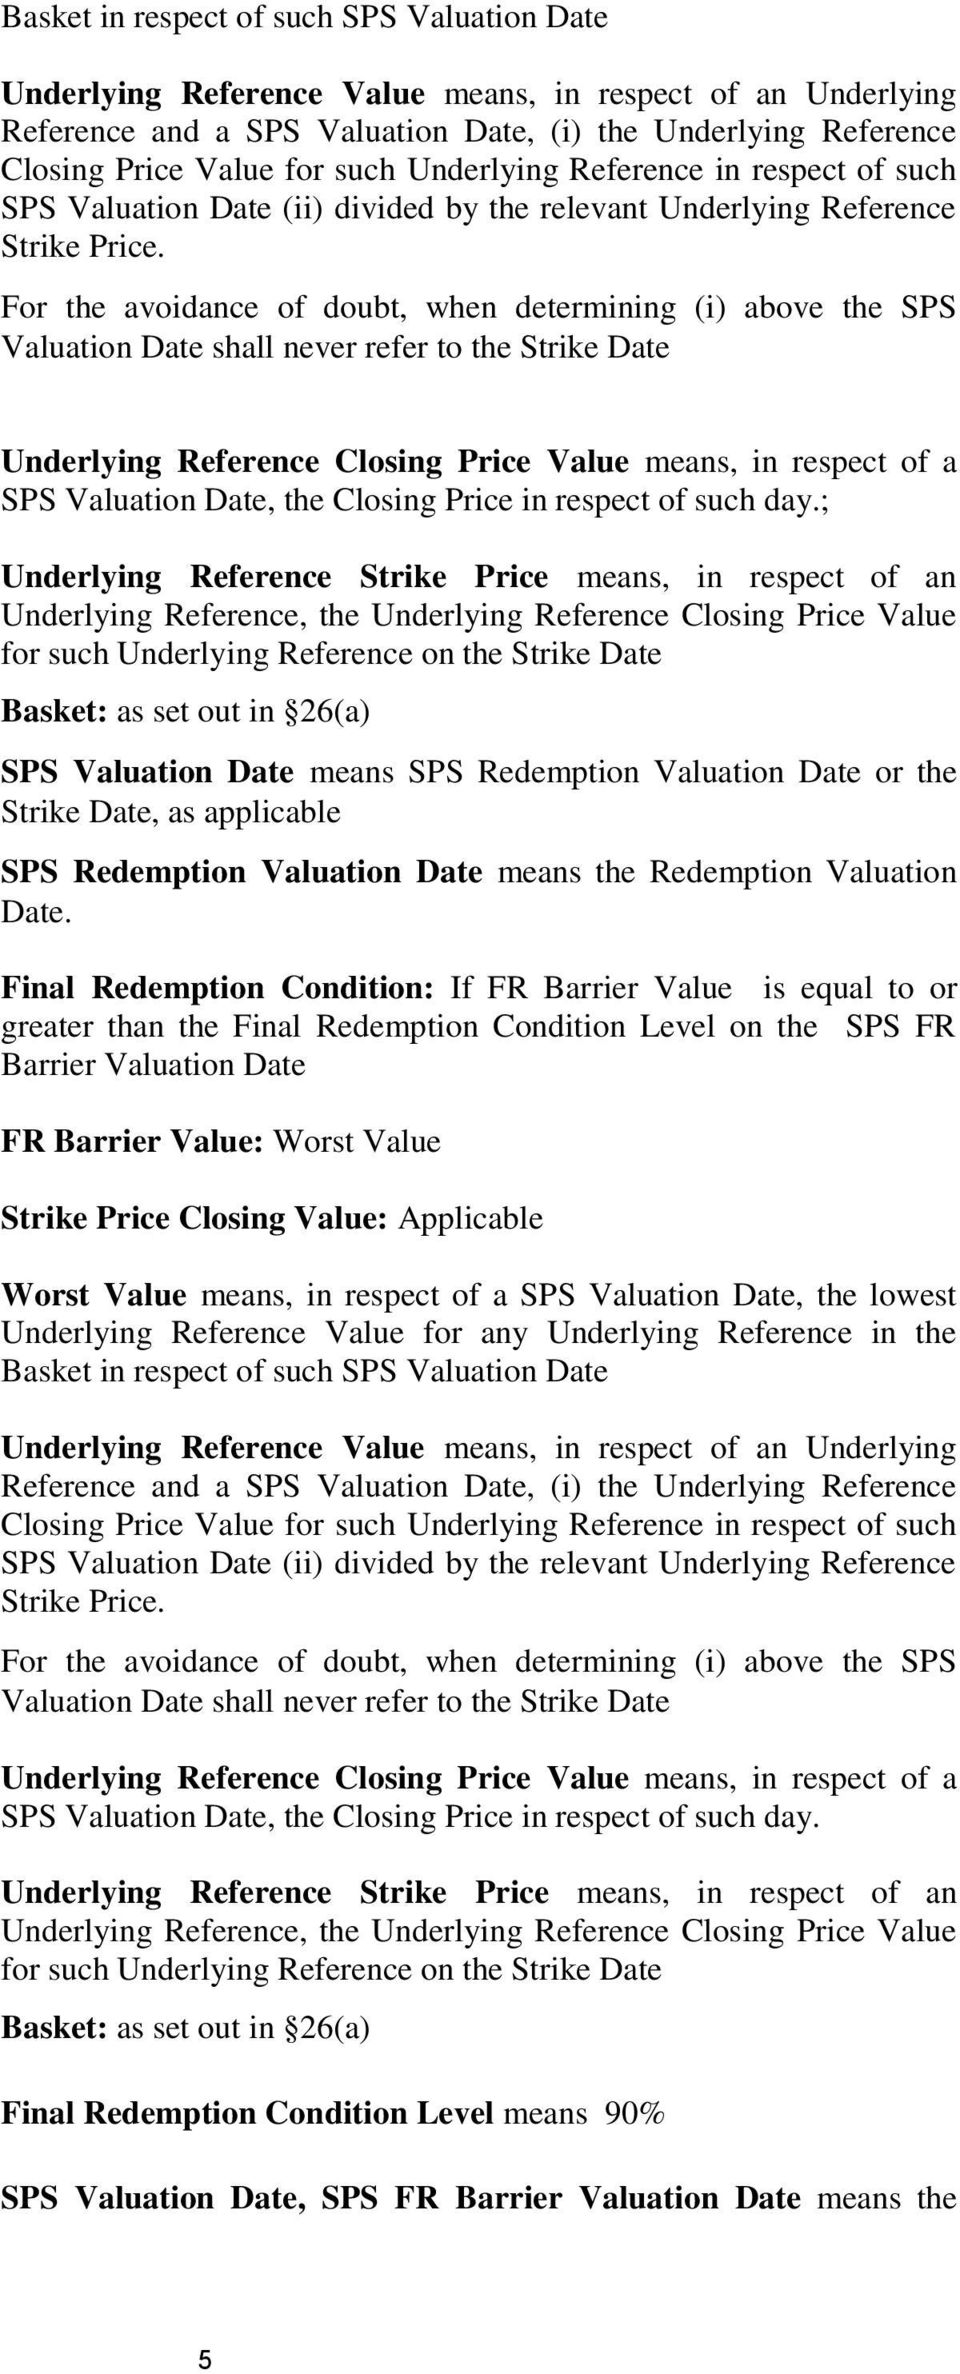 For the avoidance of doubt, when determining (i) above the SPS Valuation Date shall never refer to the Strike Date Underlying Reference Closing Price Value means, in respect of a SPS Valuation Date,